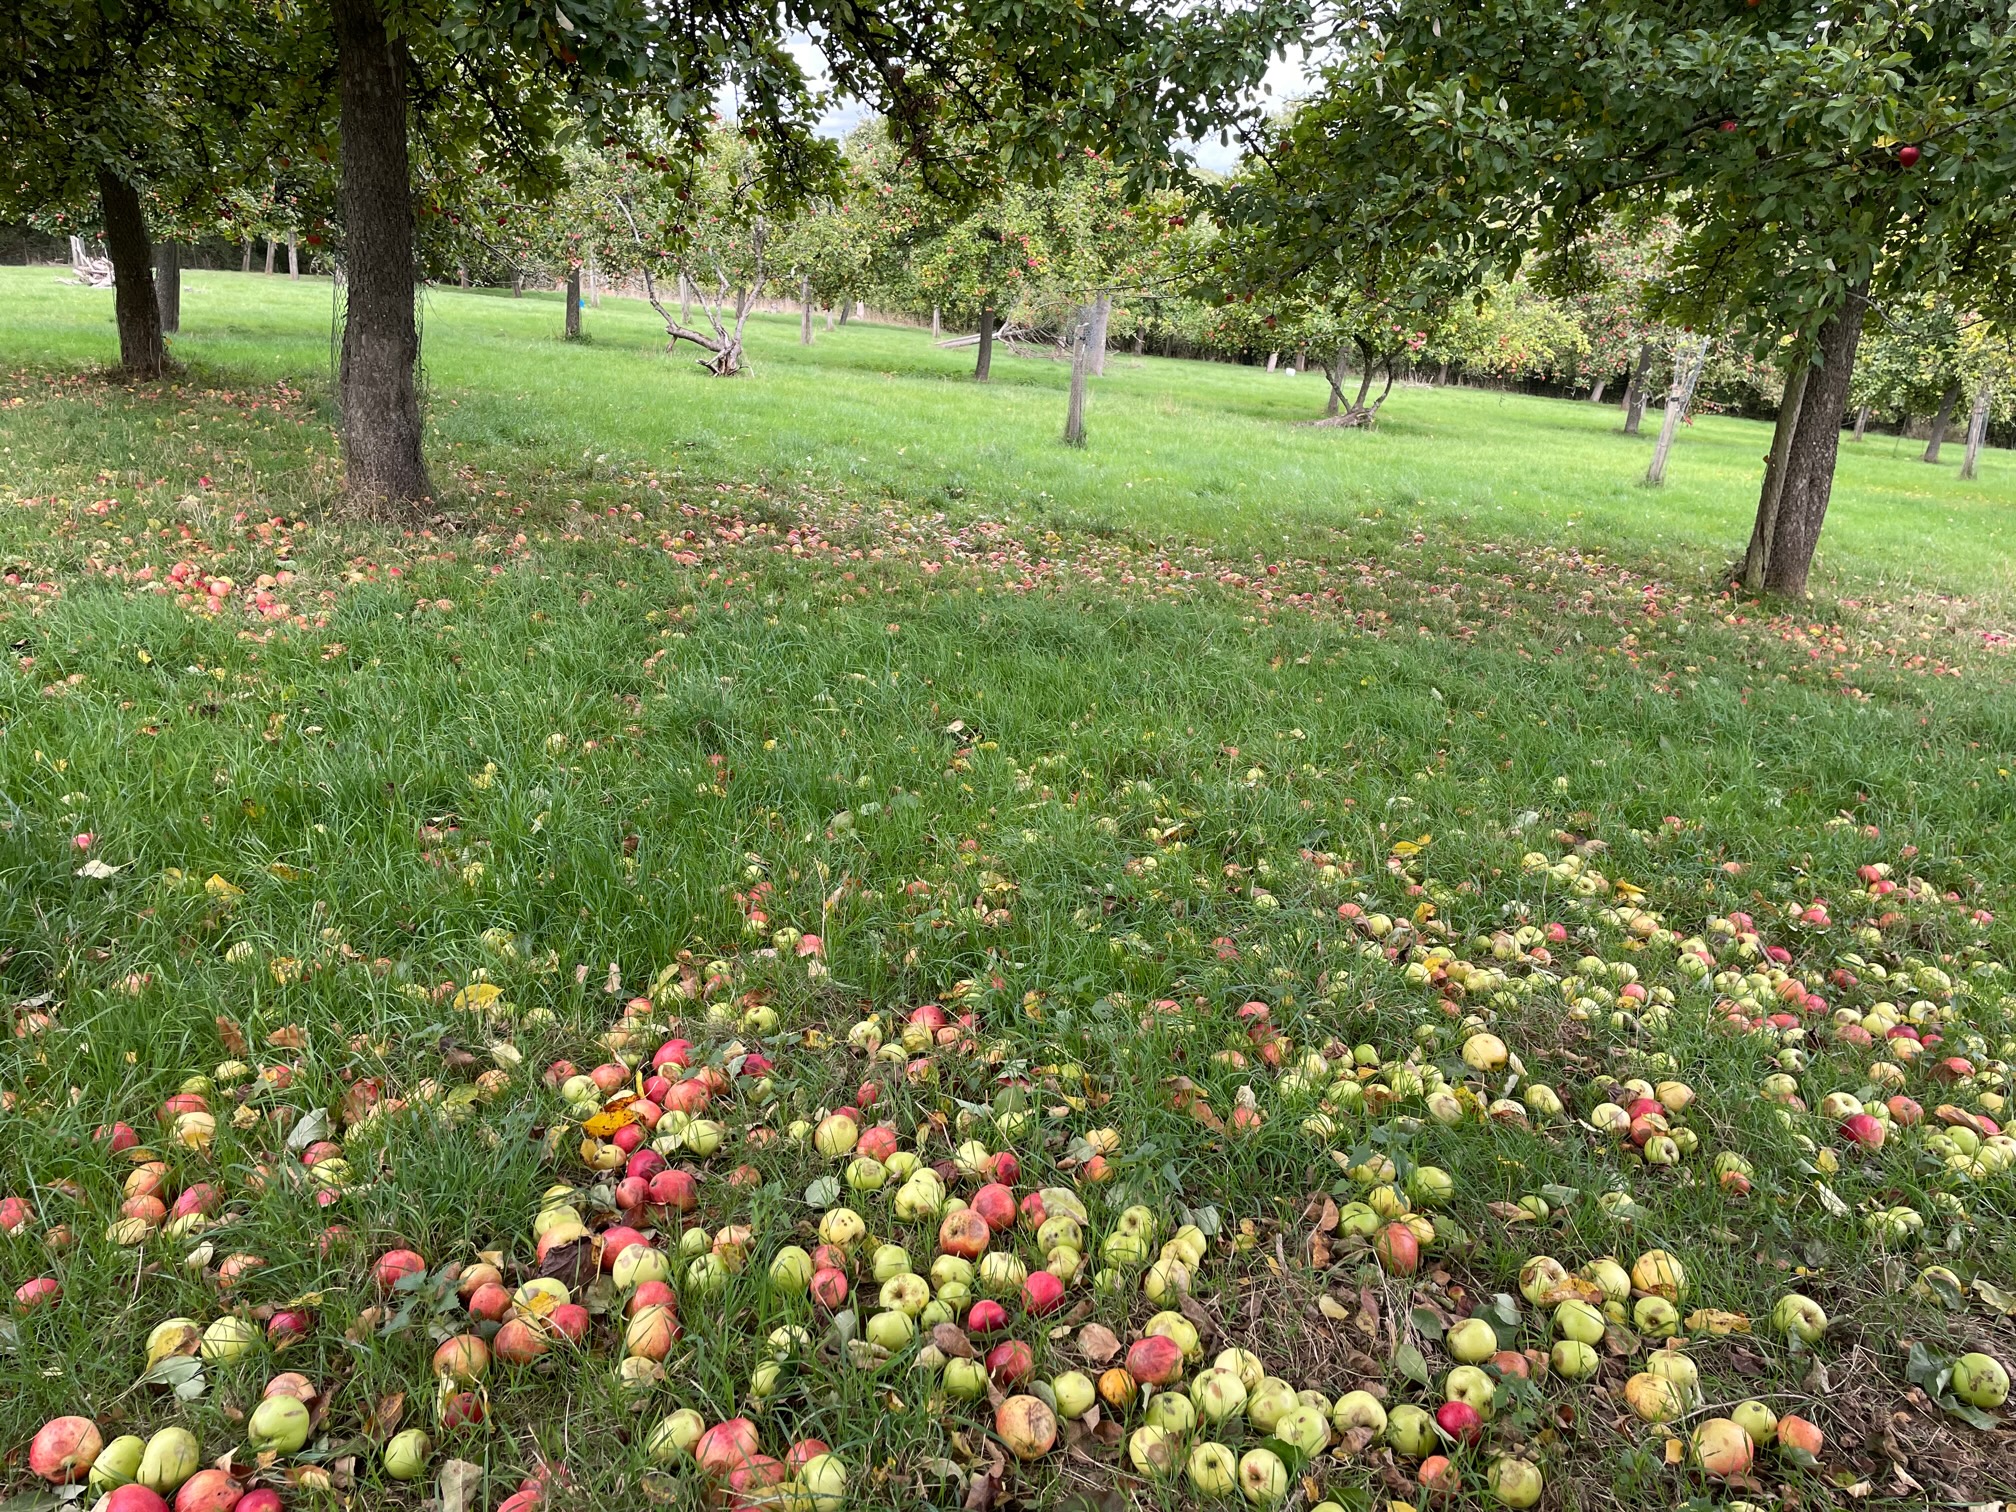 Apple orchard for harvesting apples. Apples on the ground falled from the apple tree.